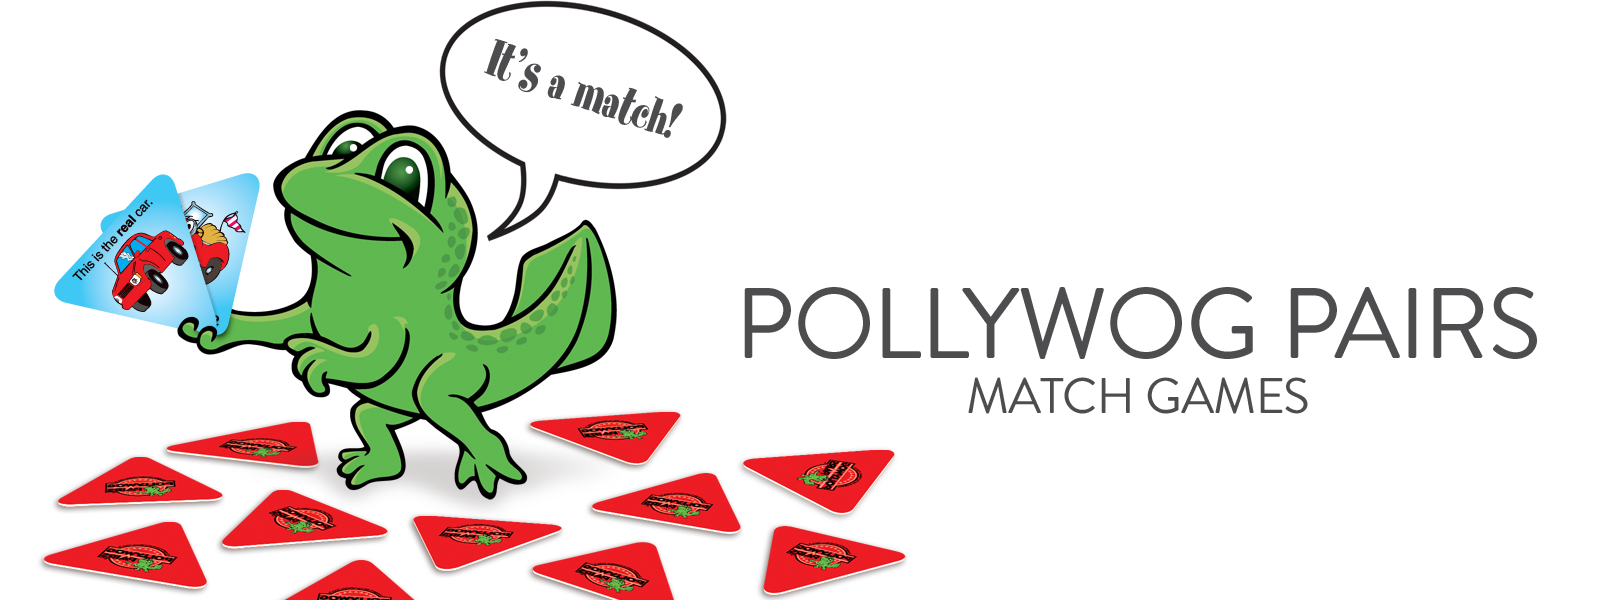 Pollywog Pairs Match Games